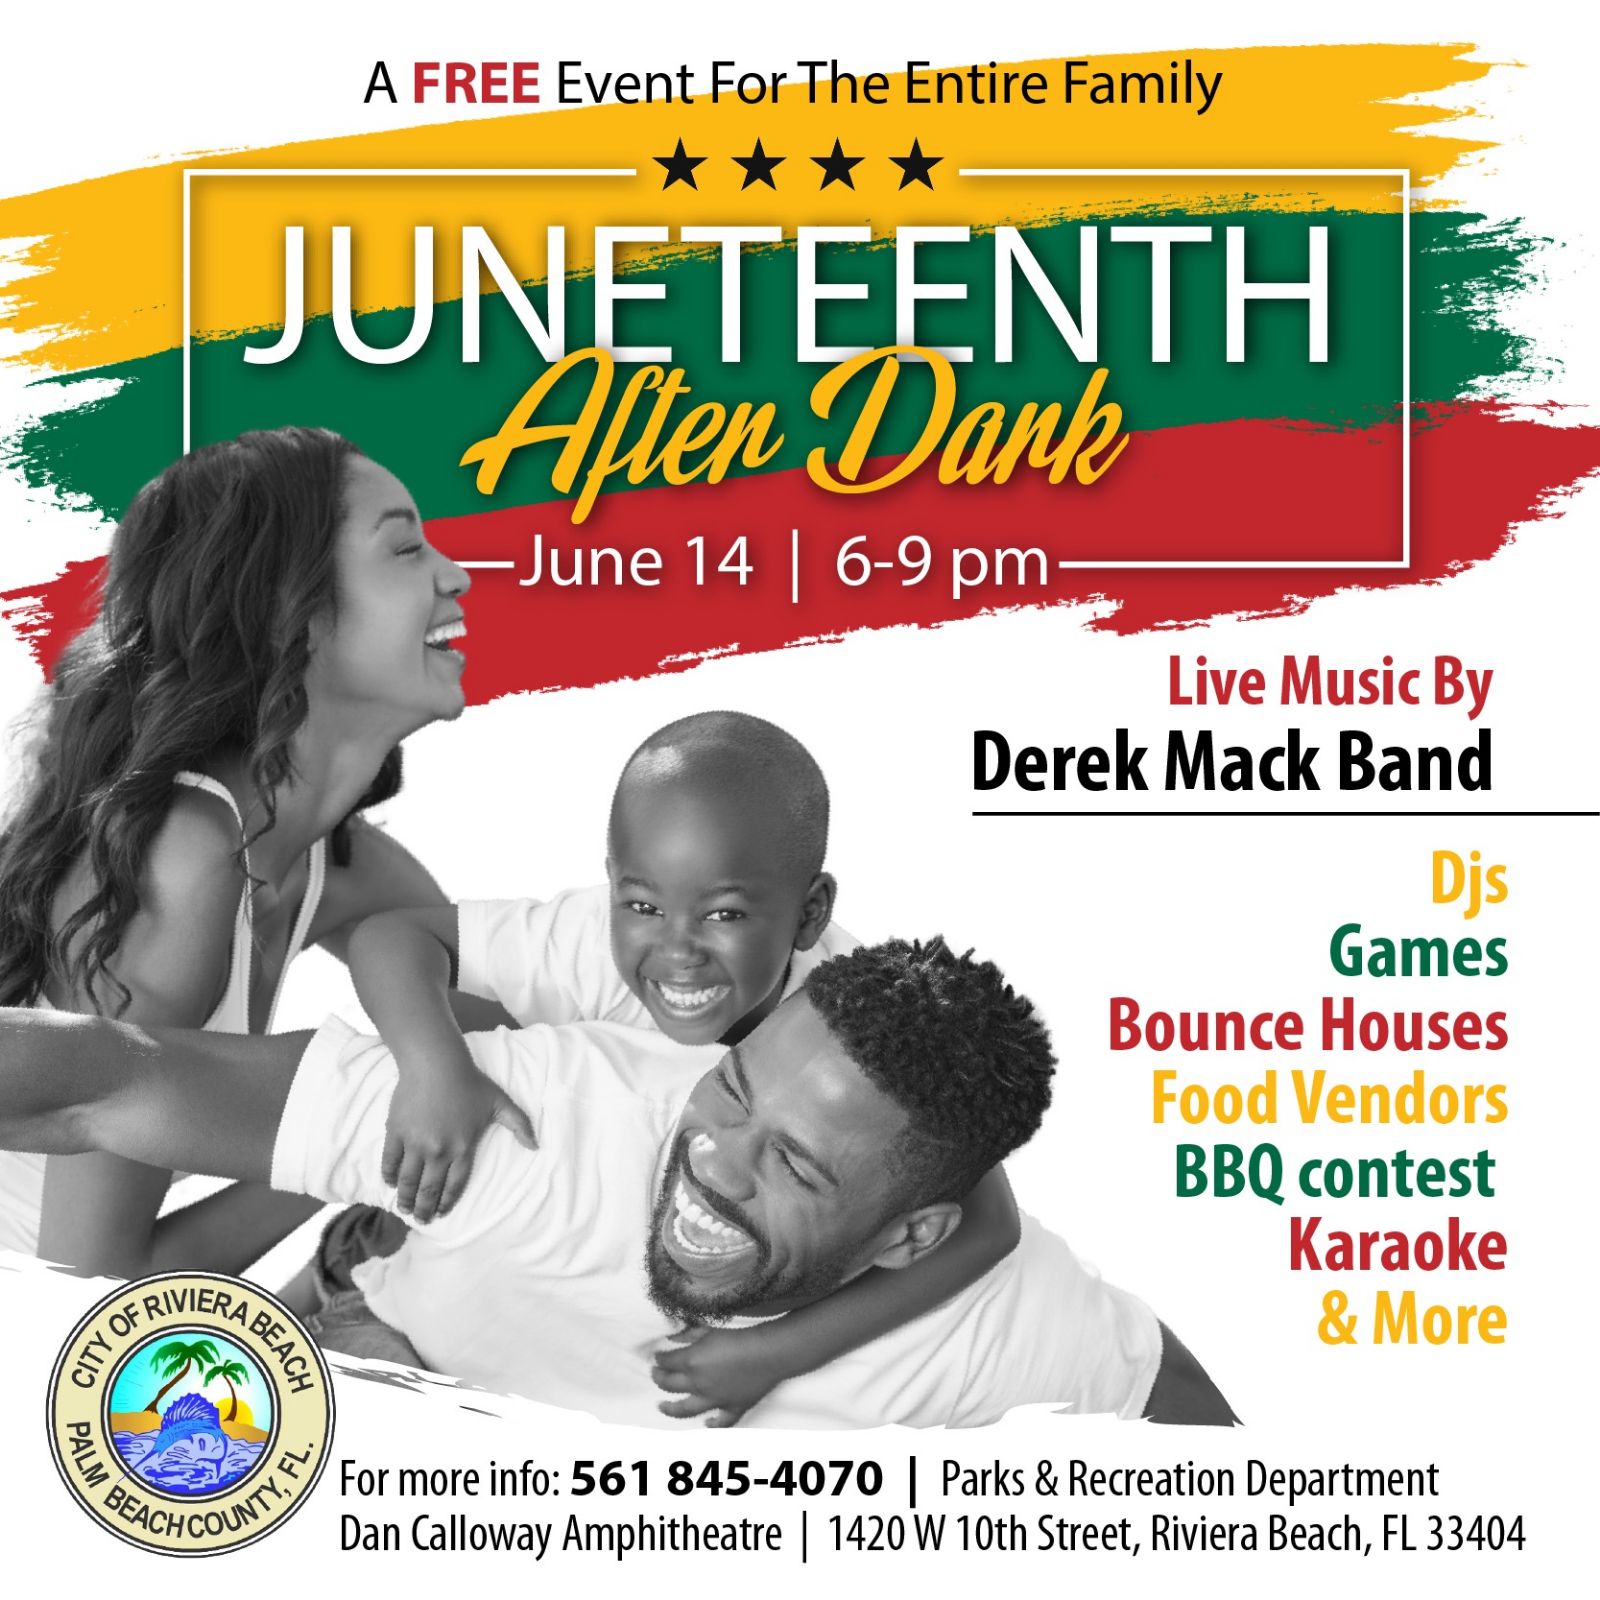 A FREE Event For The Entire Family JUNETEENTH Afien Dank —June 14 | 6-9 pm PALM BEACH COUN Live Music By Derek Mack Band Djs Games Bounce Houses Food Vendors BBQ contest Karaoke & More For more info: 561 845-4070 | Parks & Recreation Department Dan Calloway Amphitheatre | 1420 W 10th Street, Riviera Beach, FL 33404